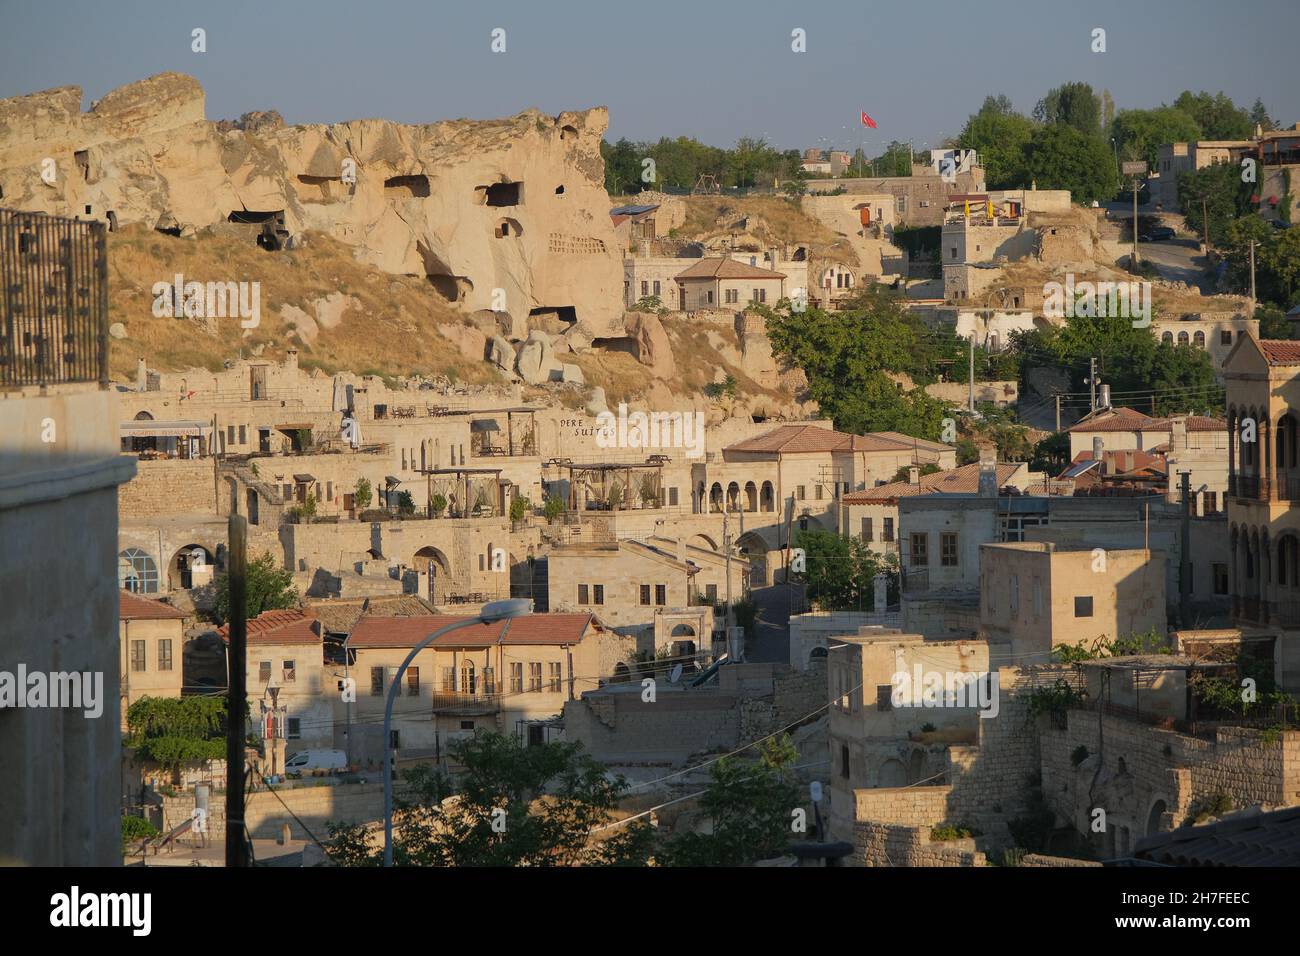 Ancient city center of cappadocia with many magnificent houses made of special stones made of volcanic ruins and wind in many centuries. Stock Photo